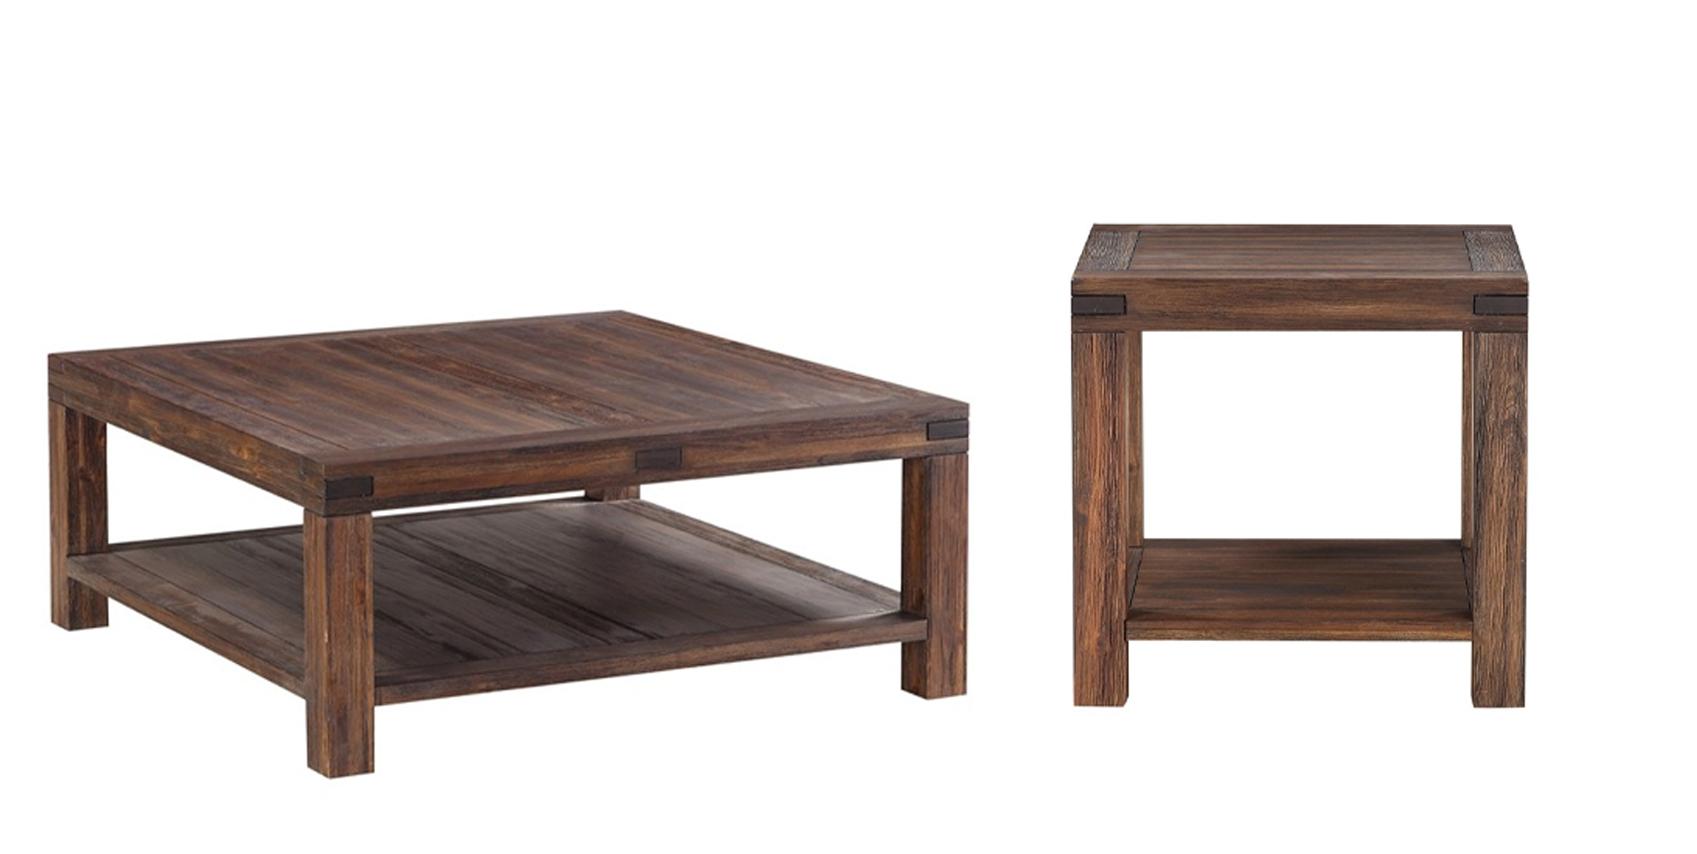 Rustic Coffee Table Set MEADOW 3F4121-2PC 